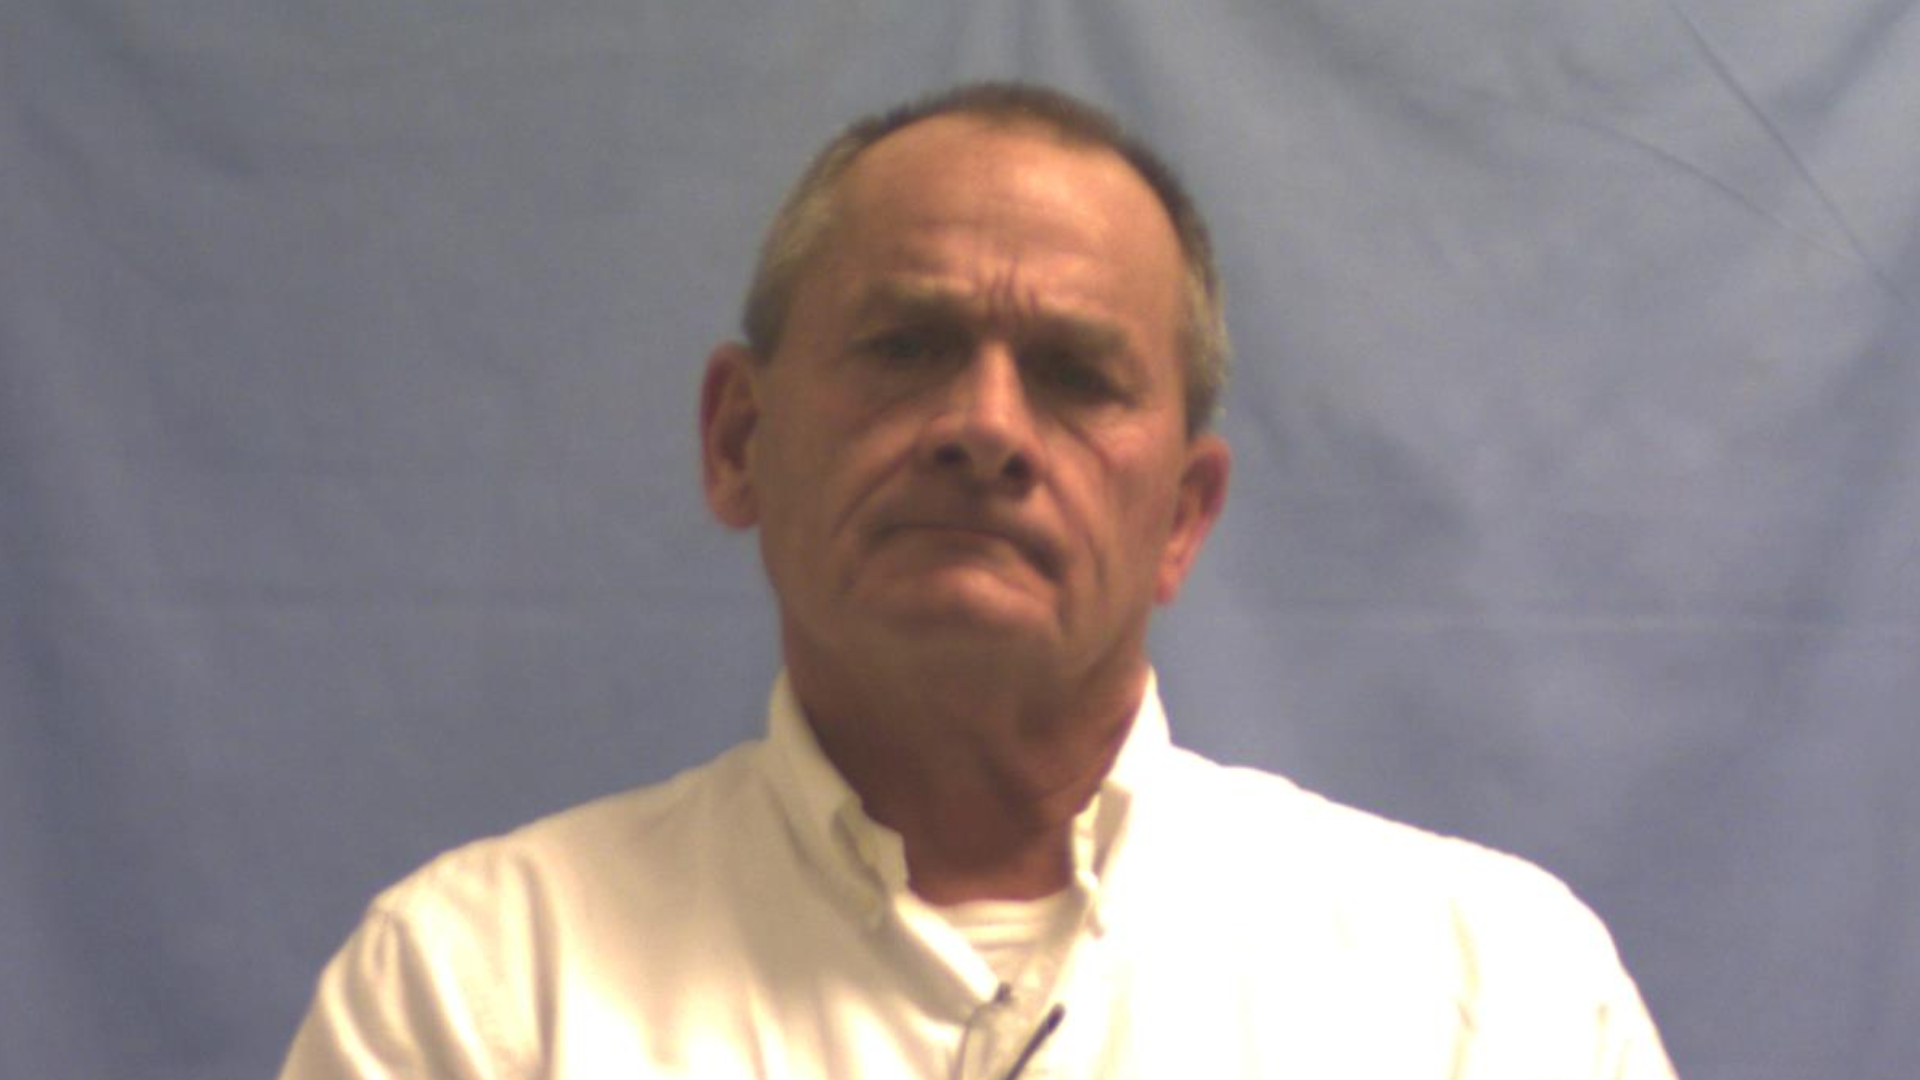 Sheriff Jimmy Stephens was arrested after state troopers found drugs in his patrol vehicle in Crawford County.